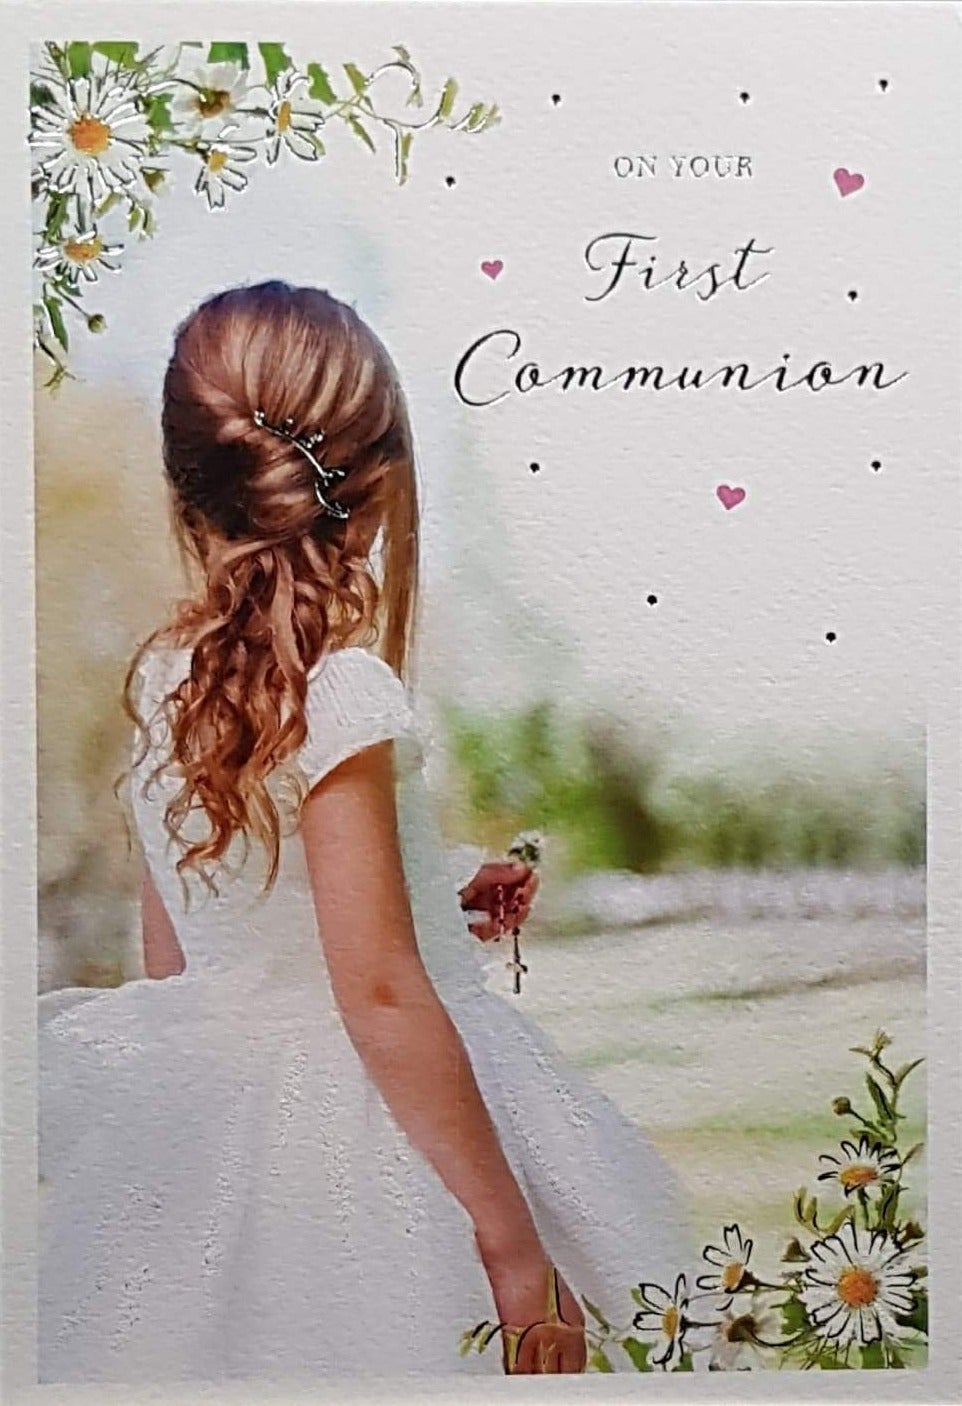 Communion Card - Girl - On Your First Communion & Girl in White Dress Holding Flower